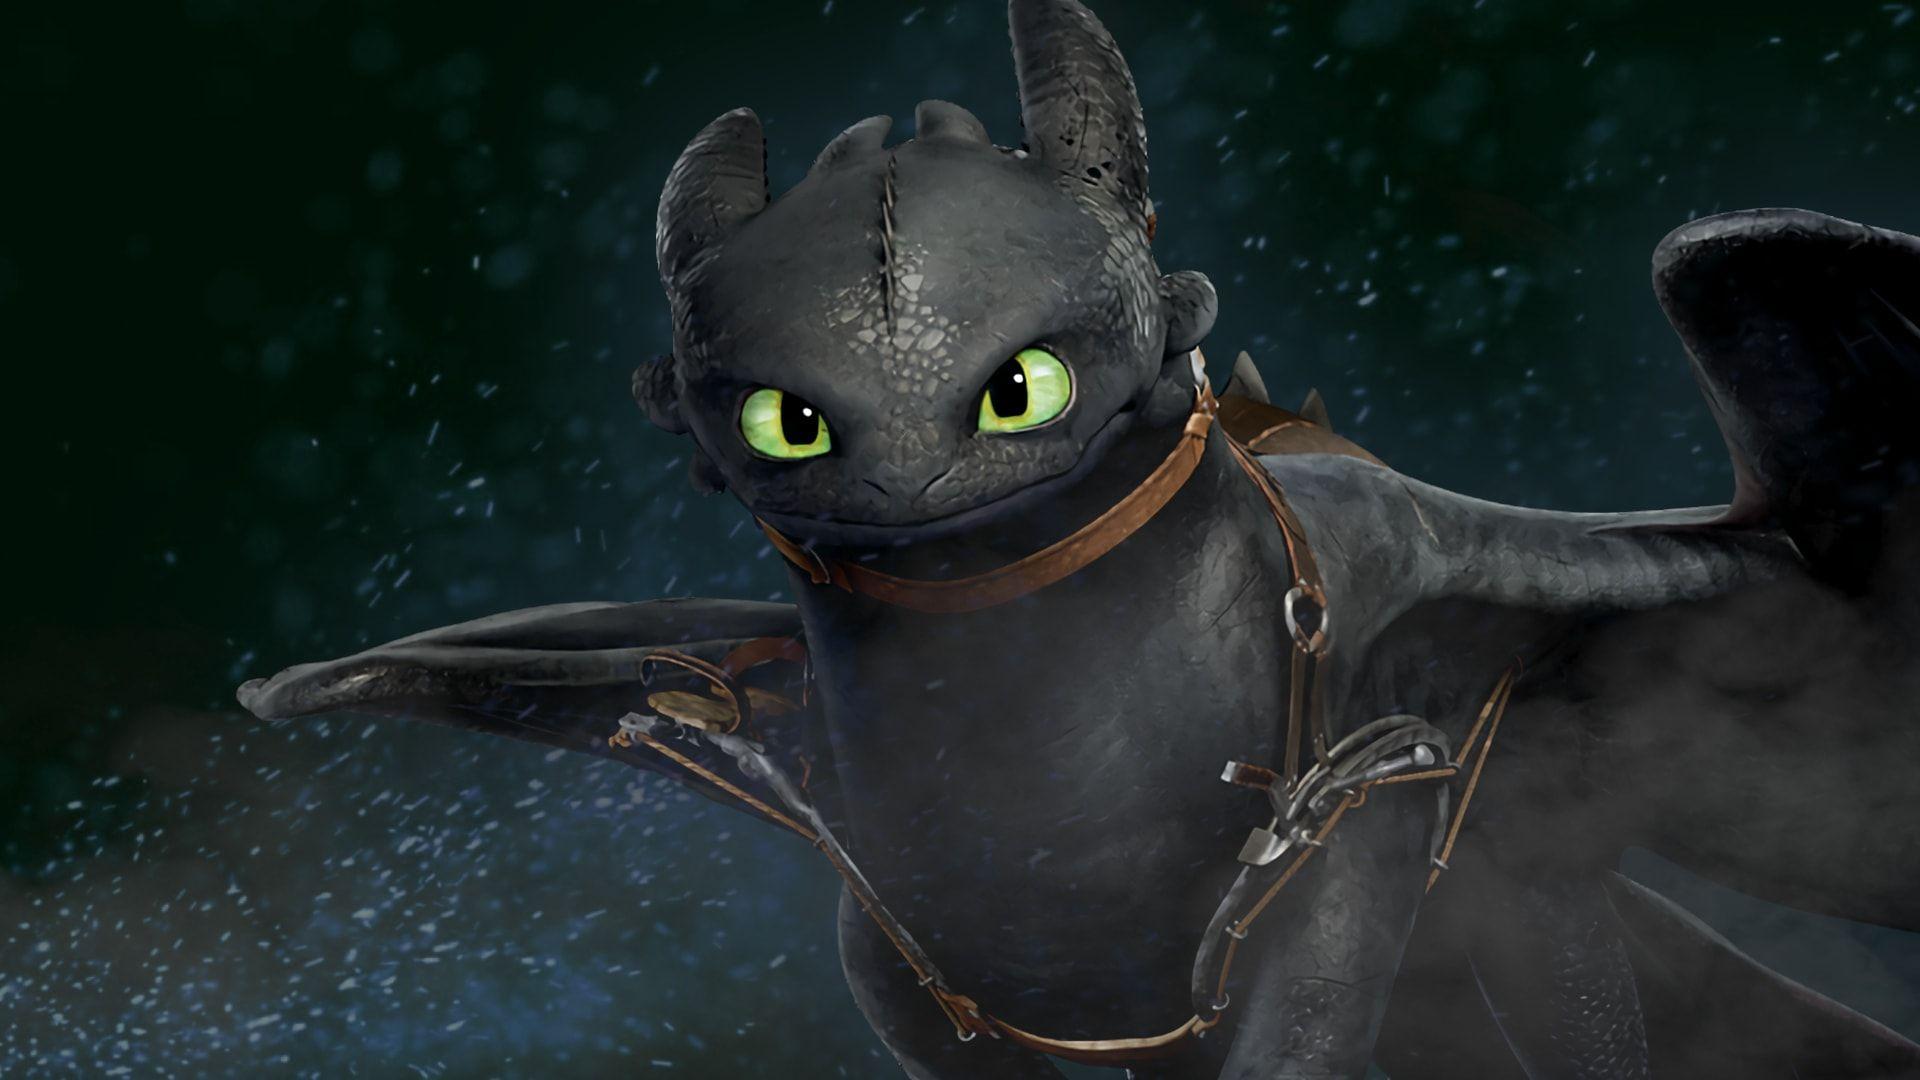 130+ Toothless (How to Train Your Dragon) HD Wallpapers and Backgrounds